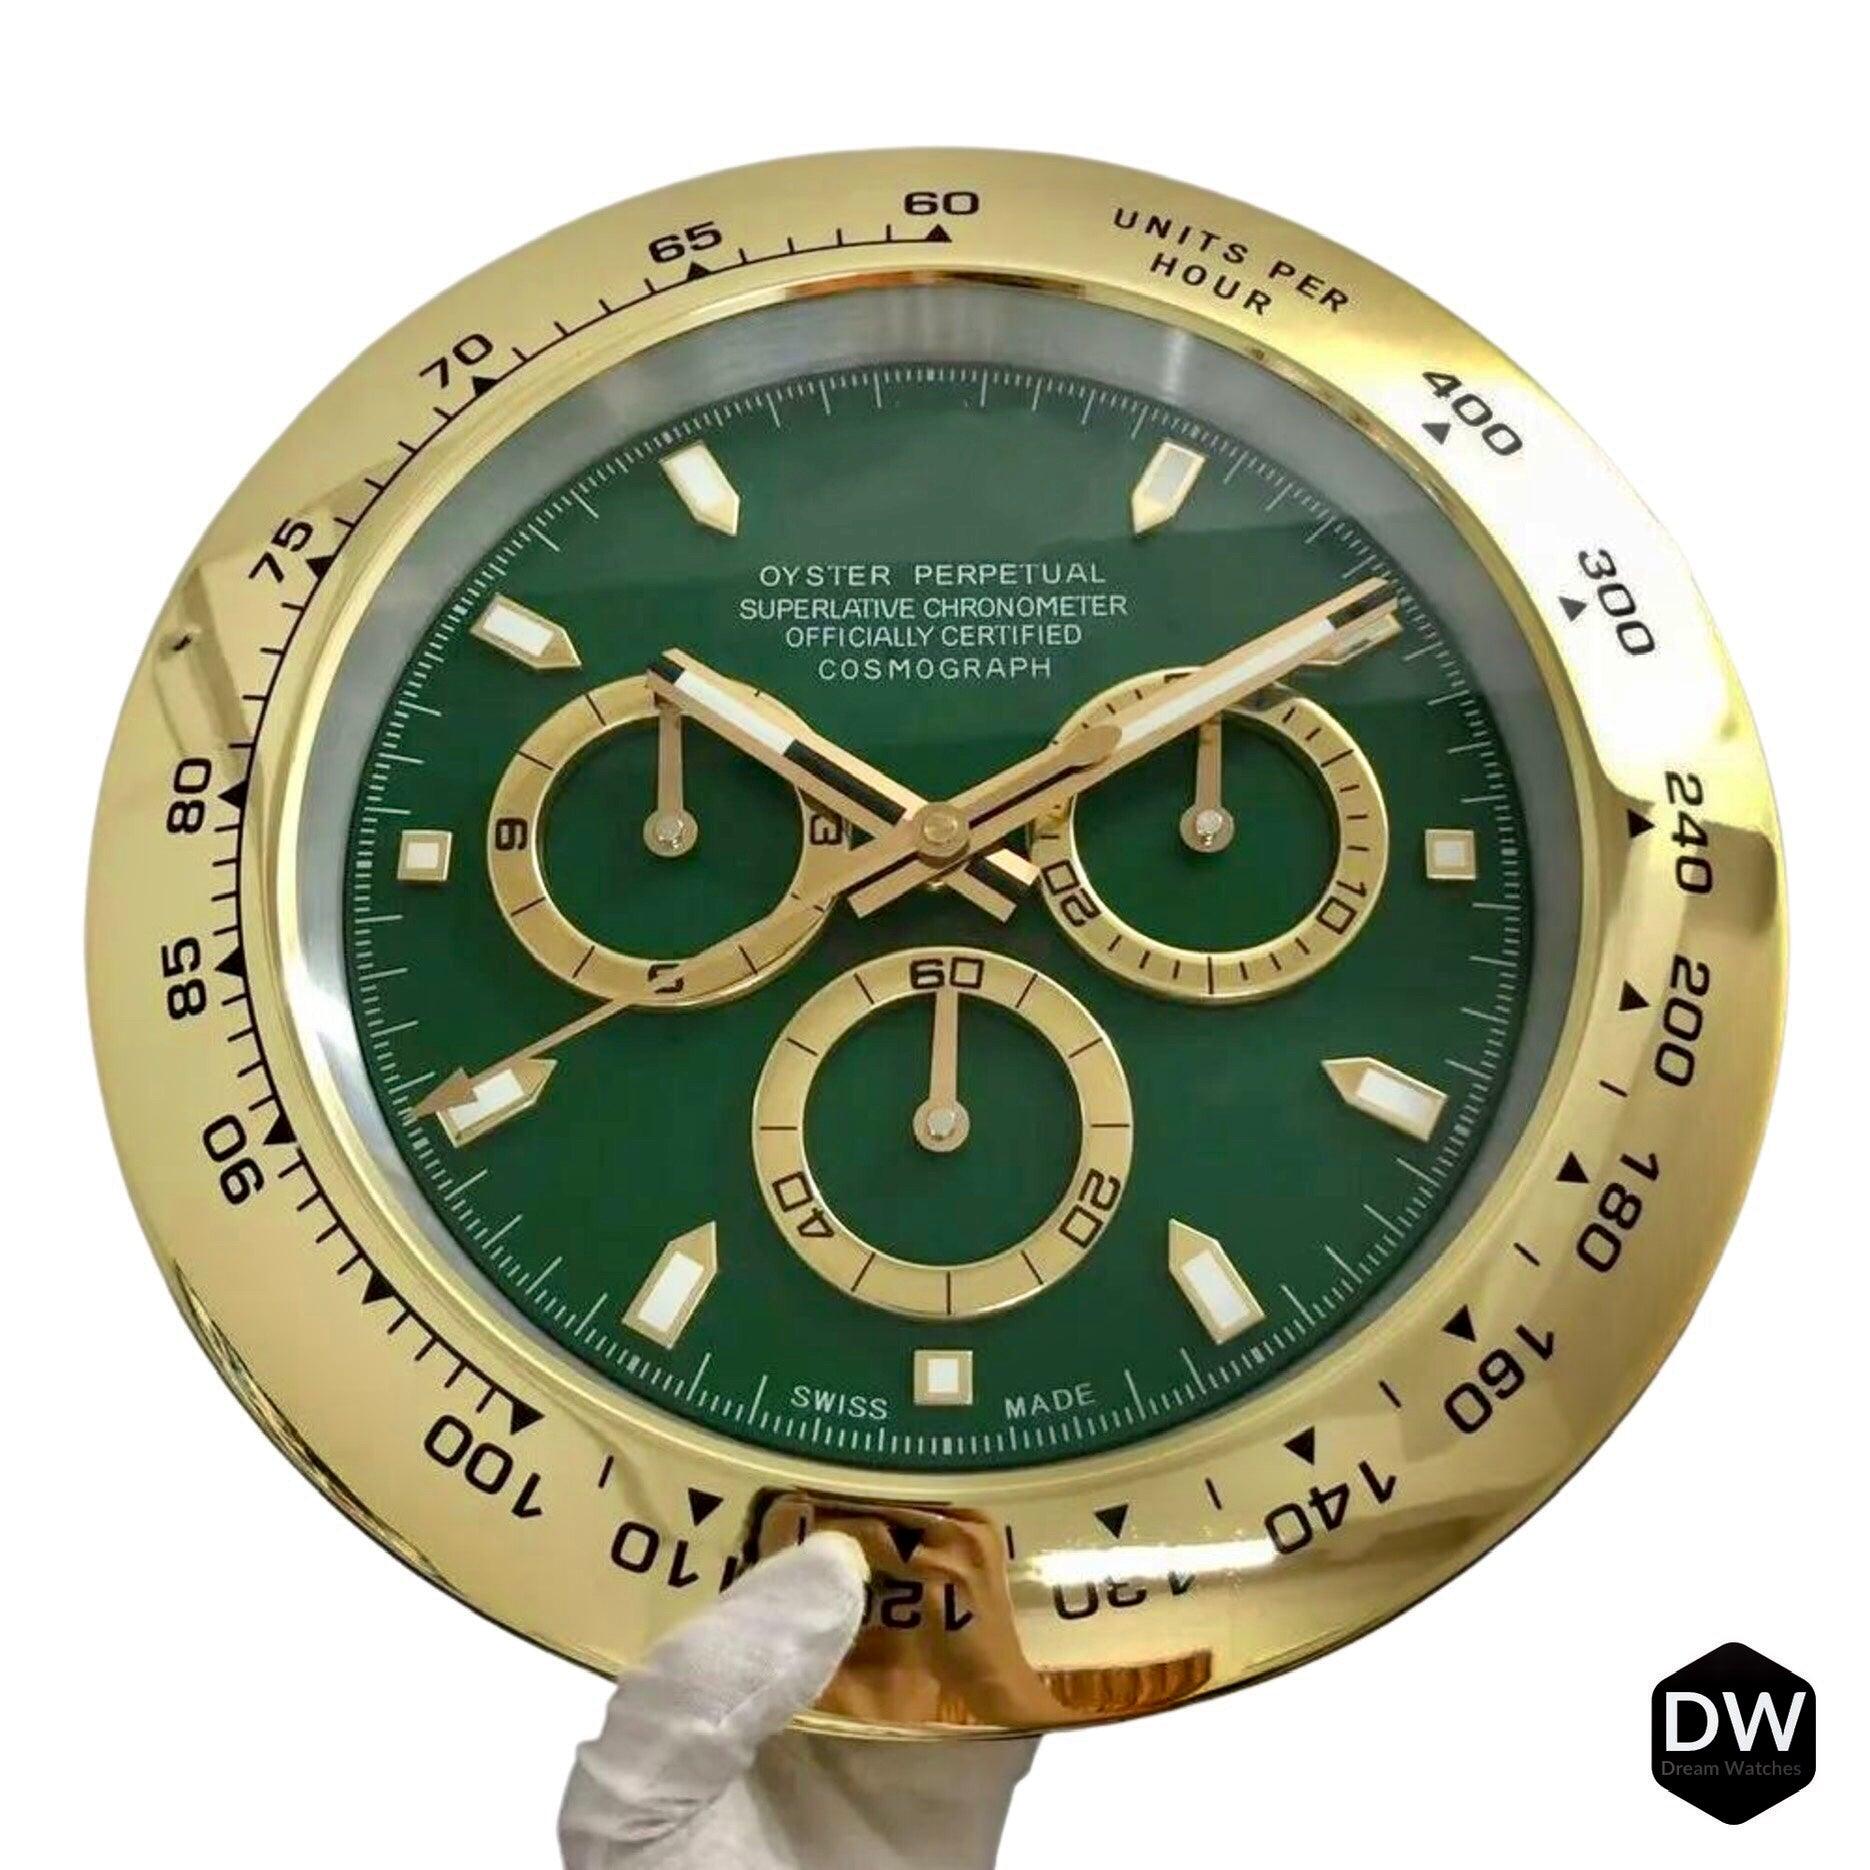 ROLEX WALL CLOCK INDIA LUXURY Horology Timepiece Wall Clock for Home and Office